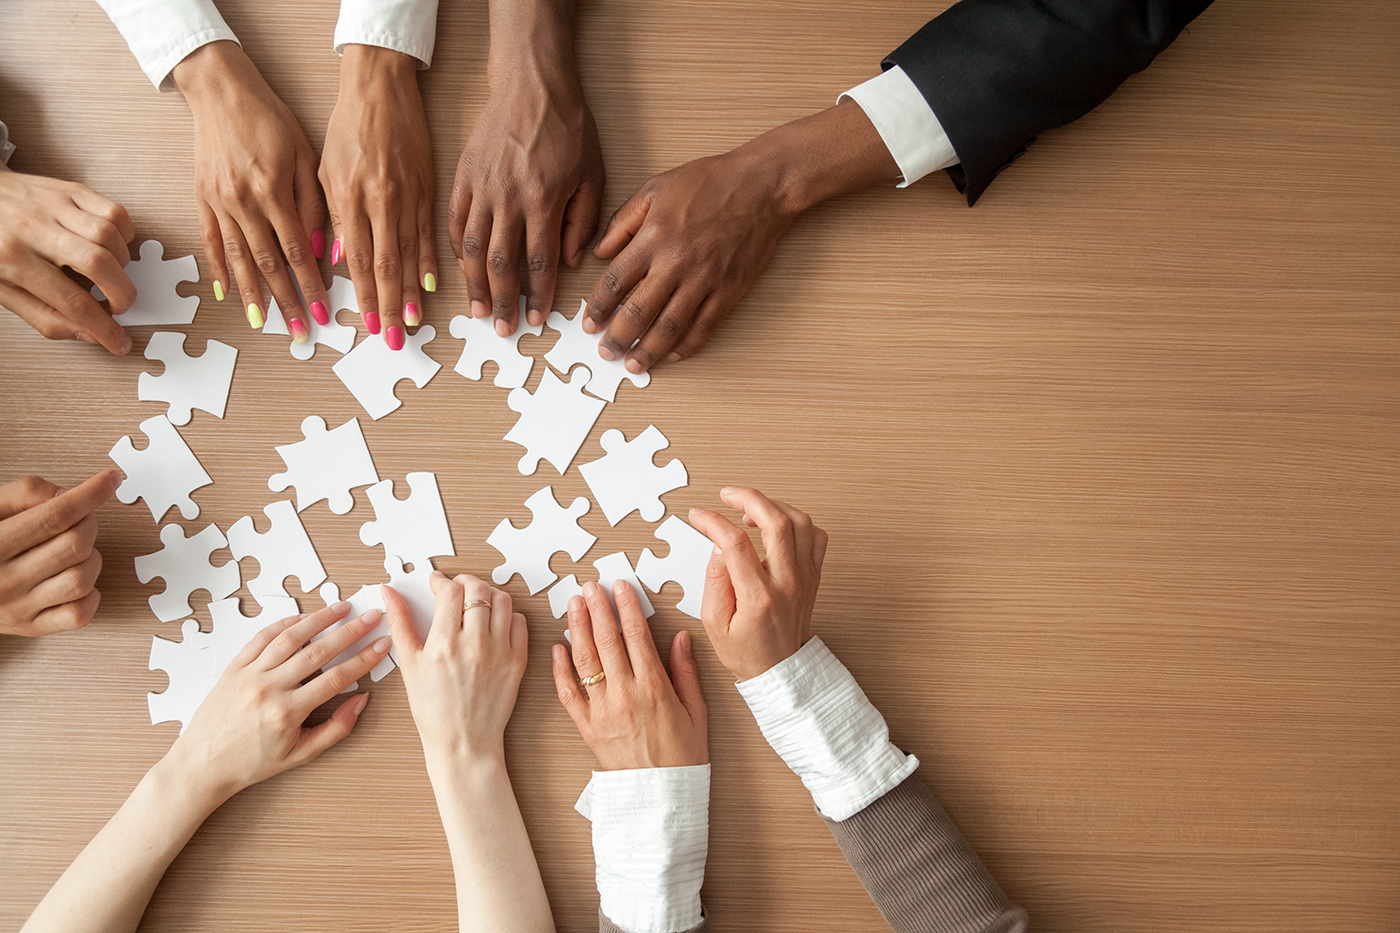 Hands of multi-ethnic business team assembling jigsaw puzzle, top view